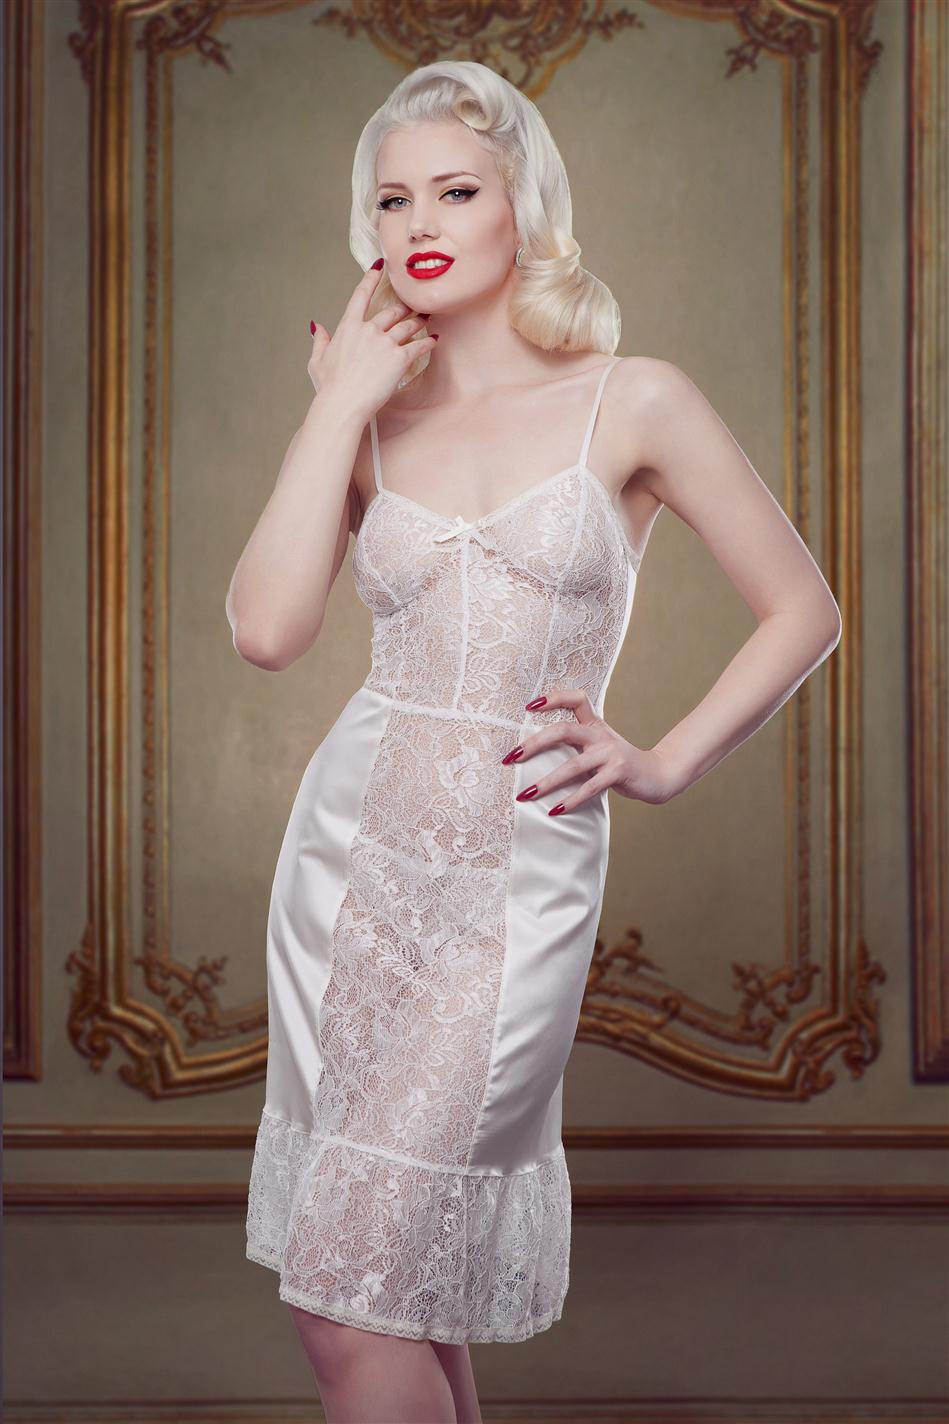 Vintage Bridal Lingerie - The Nell Slip from Betty Blues Loungerie